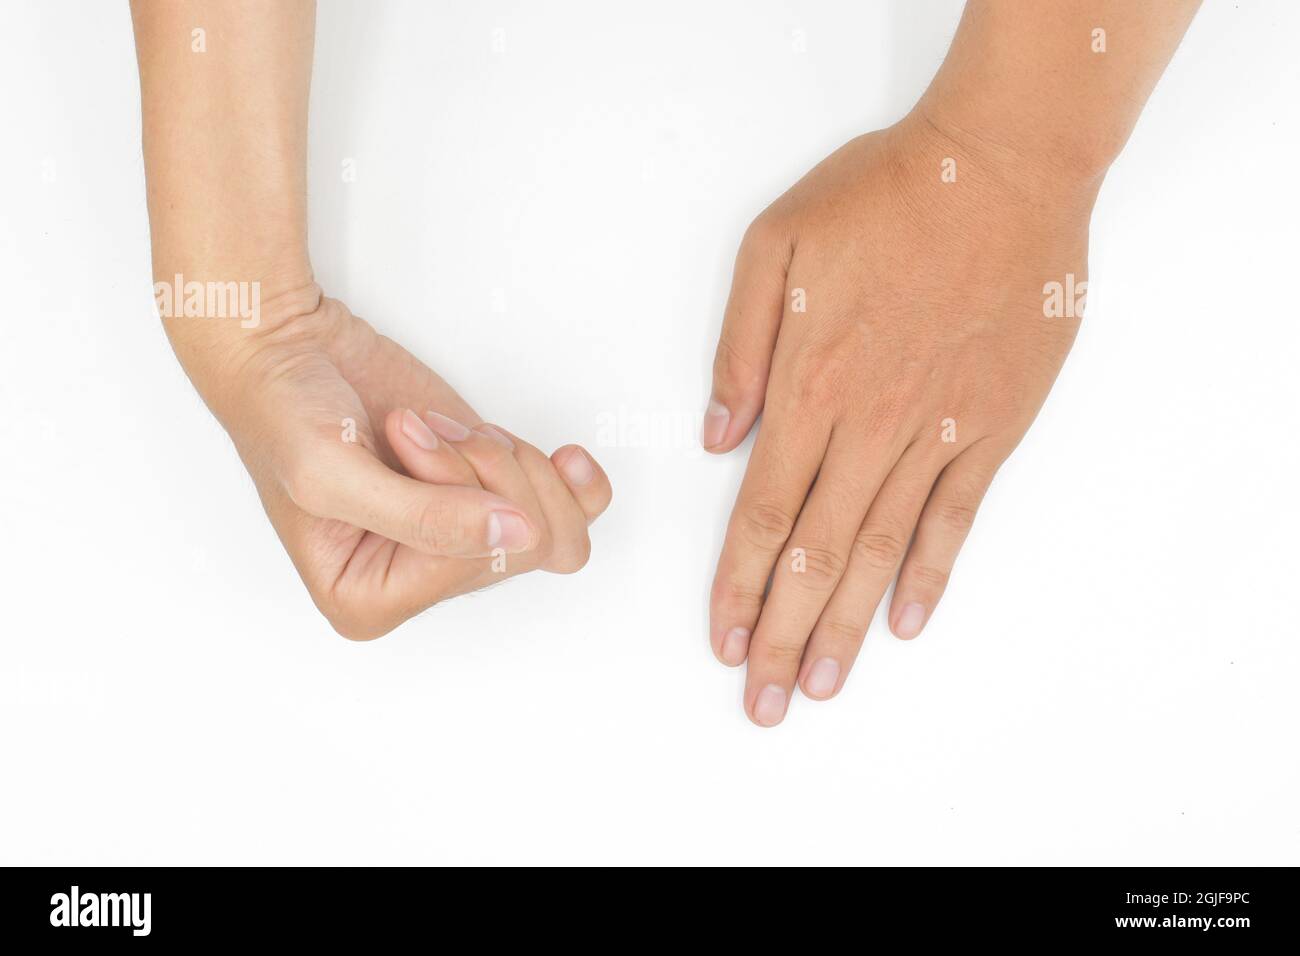 Hand muscle spasm in Asian young man. Unilateral hand deformity. Abnormal fingers flexion. Isolated on white background. Stock Photo